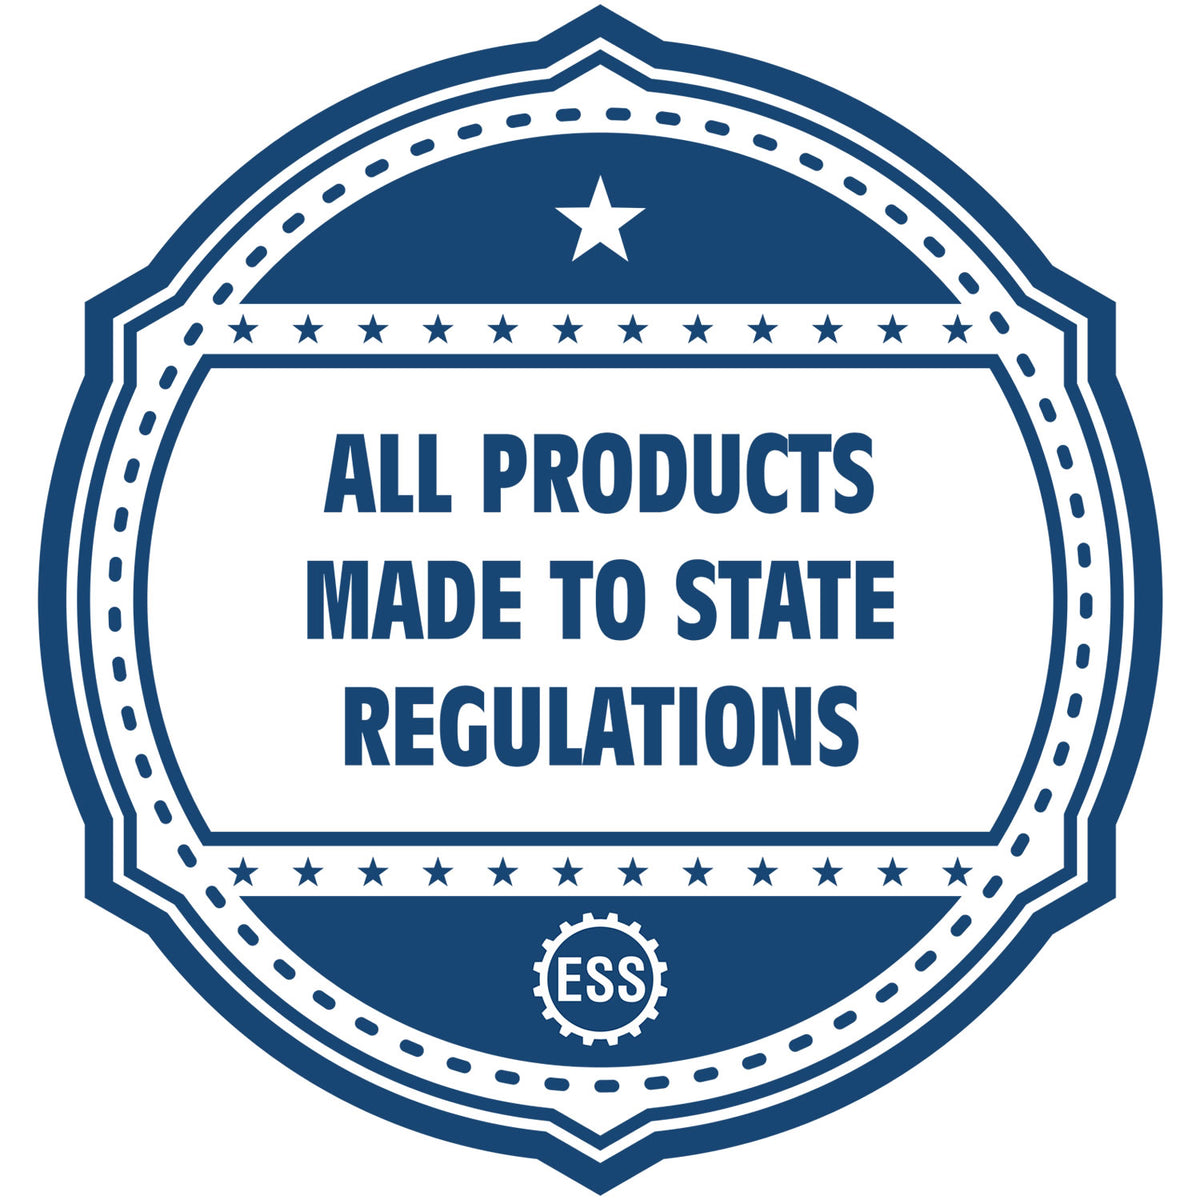 An icon or badge element for the Georgia Desk Surveyor Seal Embosser showing that this product is made in compliance with state regulations.